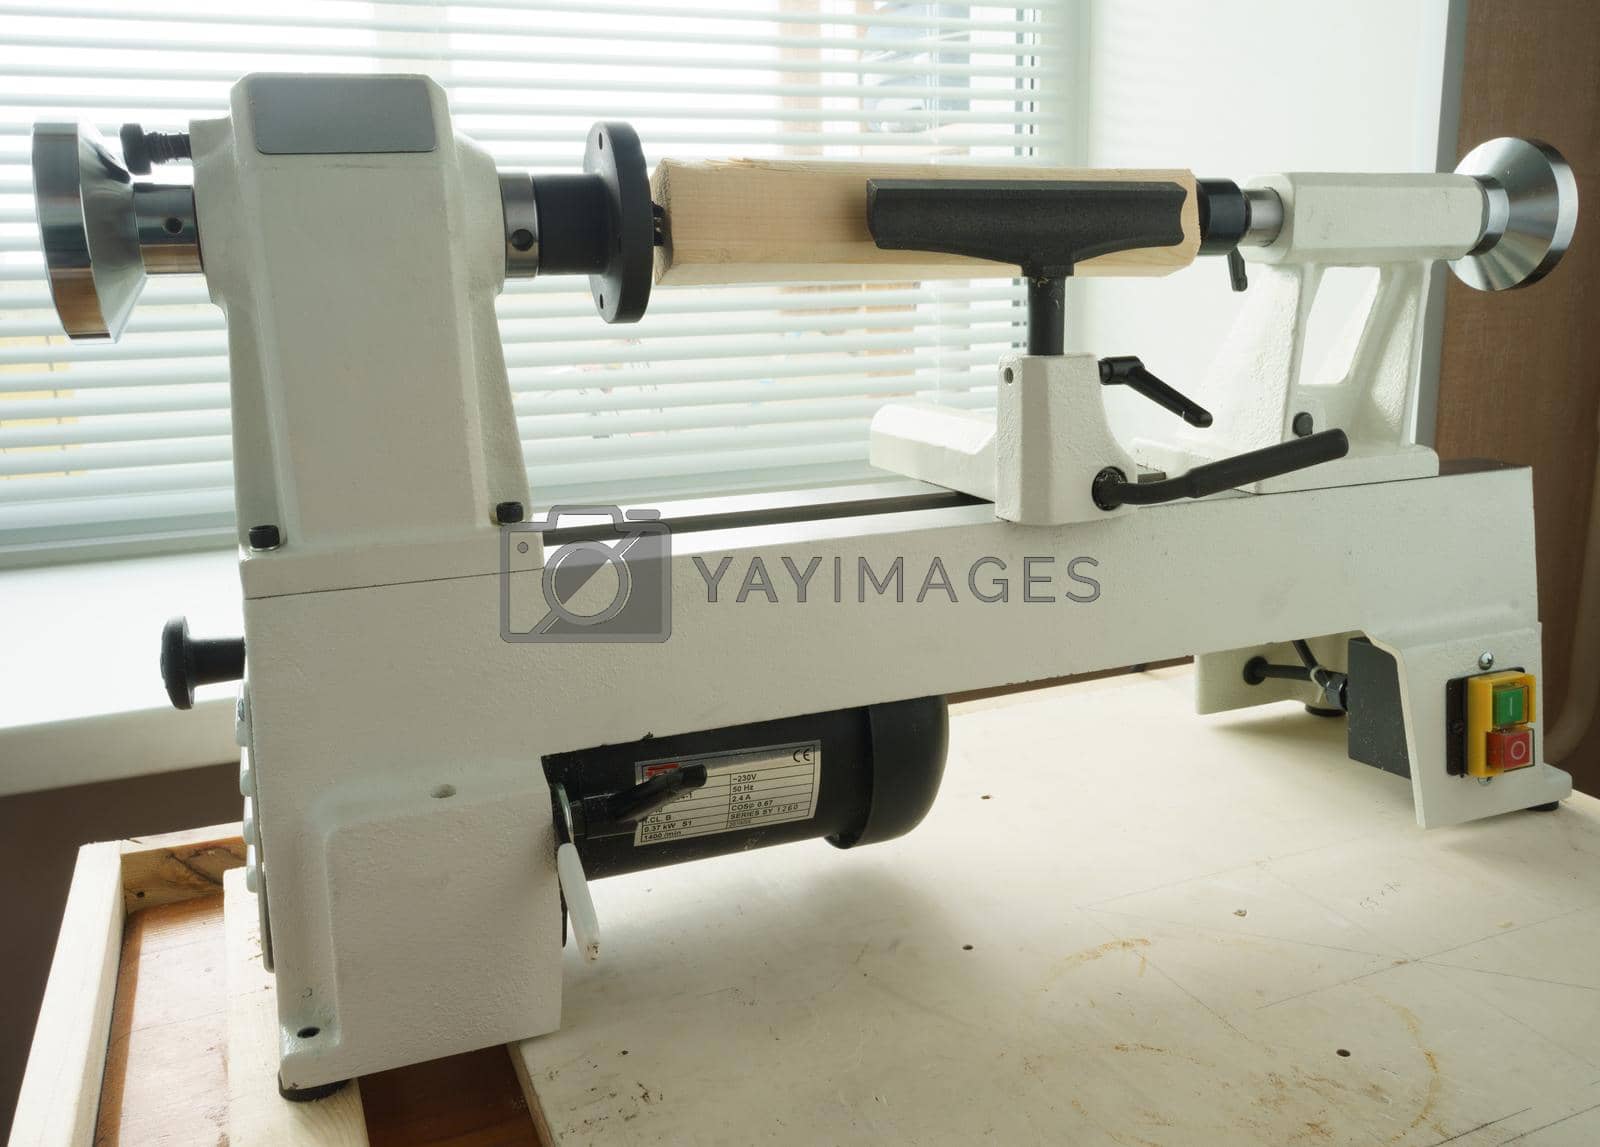 Royalty free image of Woodworking Machine by Supertooper